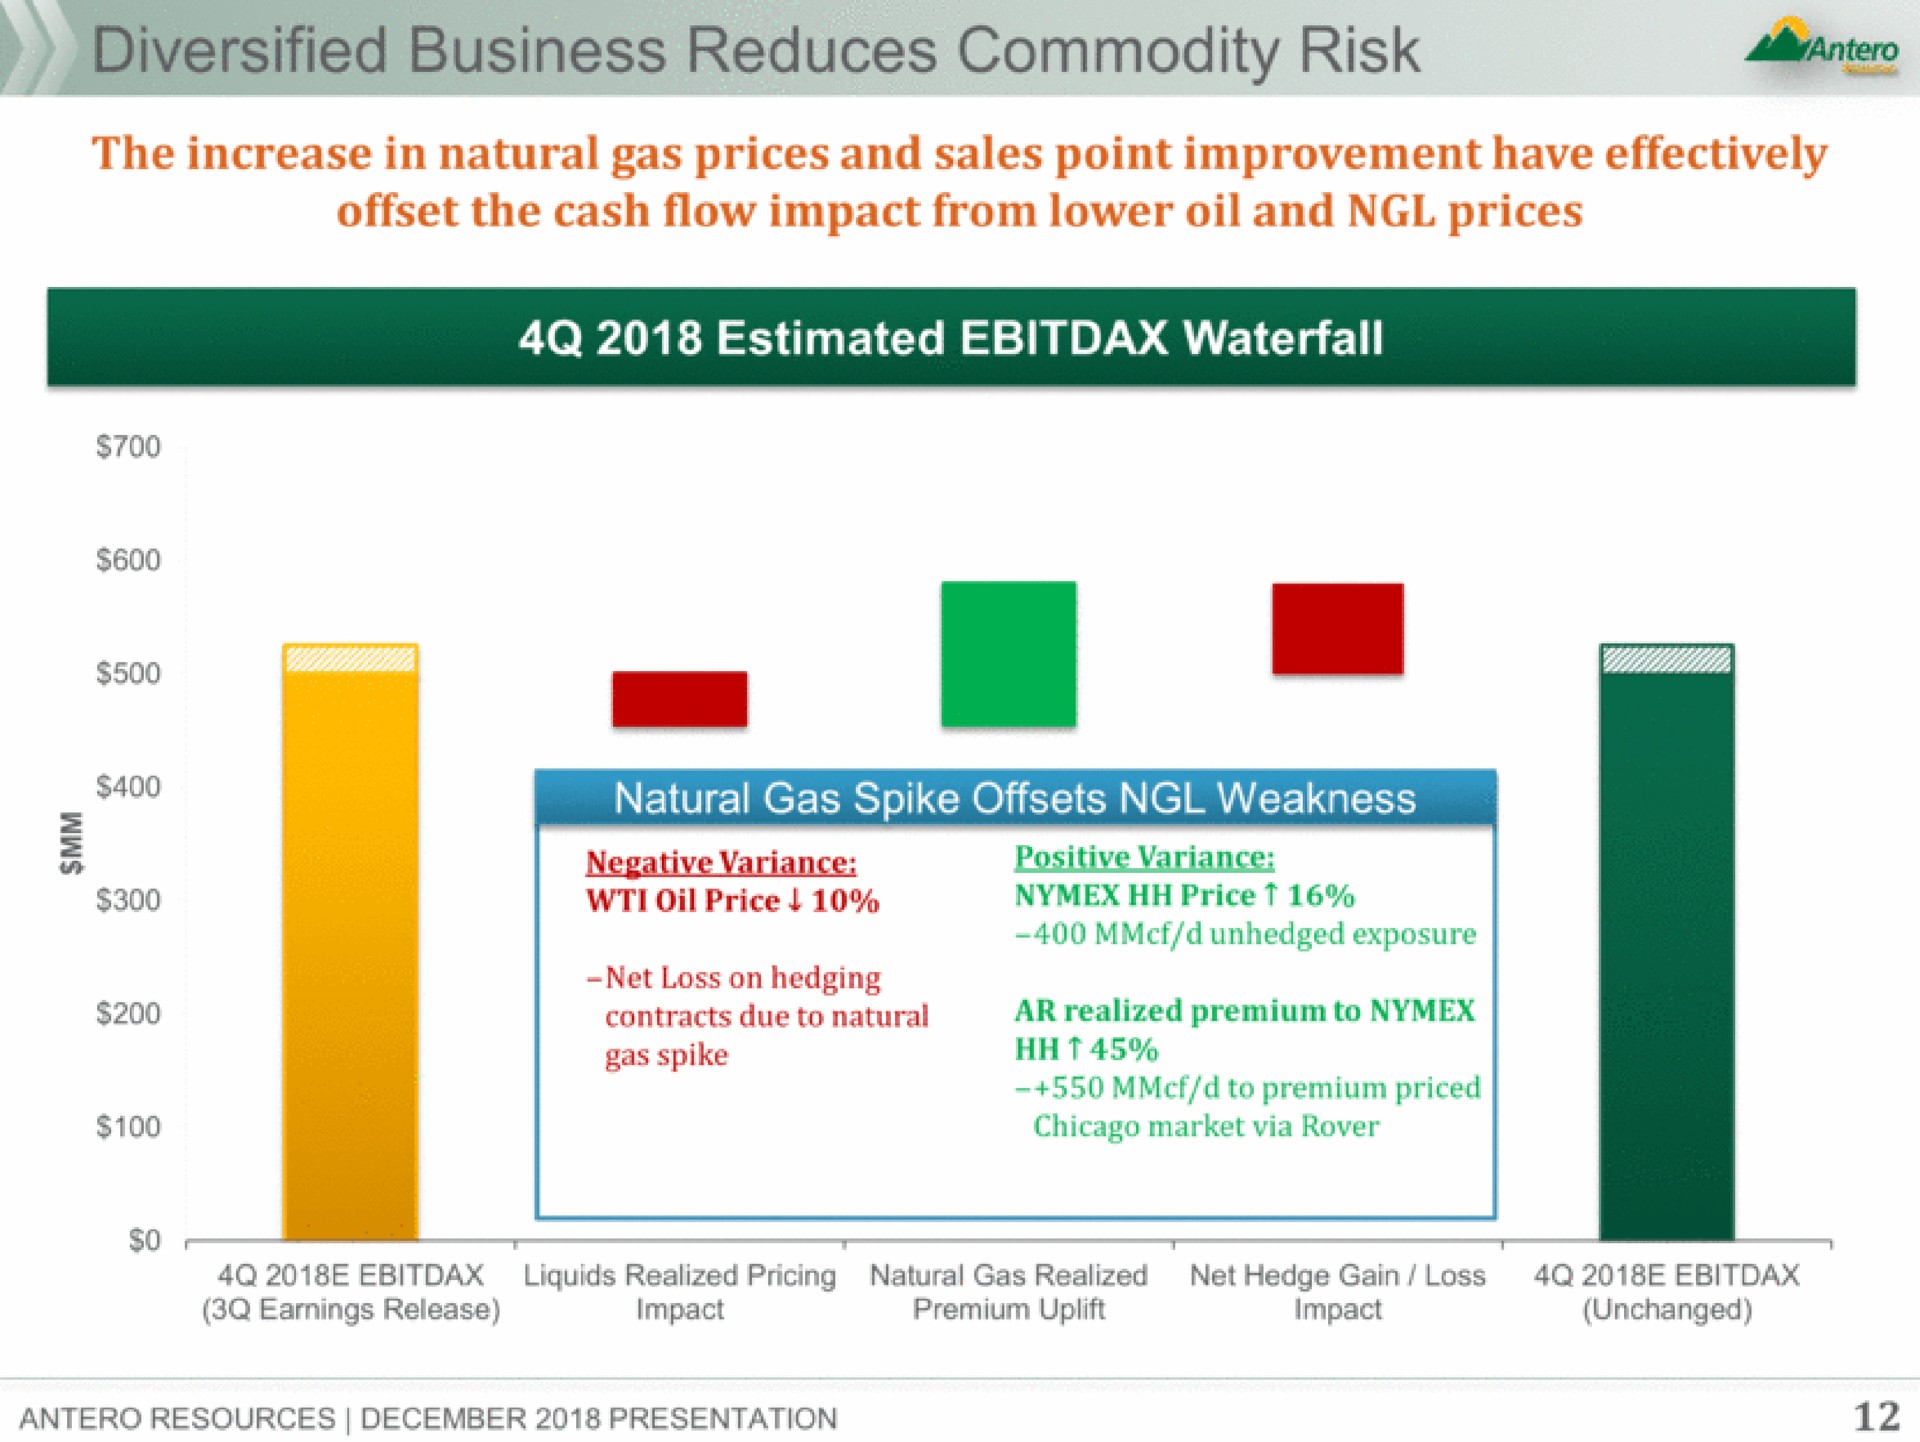 business reduces commodity risk the increase in natural gas prices and sales point improvement have effectively offset the cash flow impact from lower oil and prices natural gas spike offsets weakness | Antero Midstream Partners